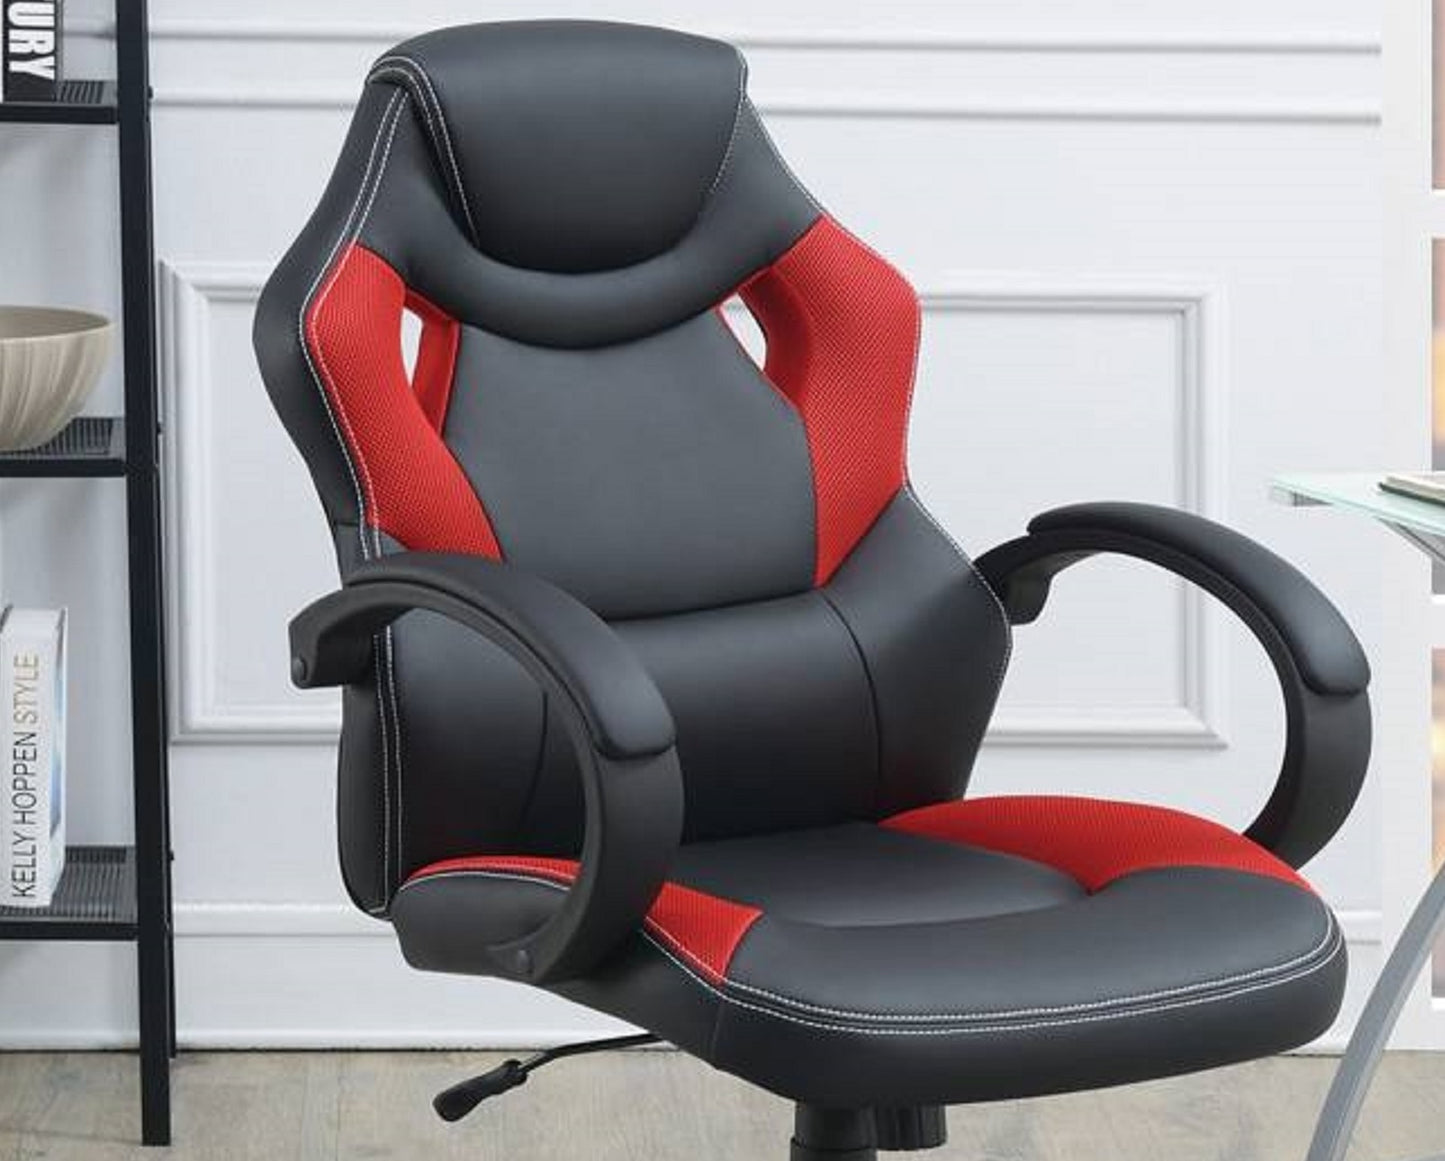 Kpak Gaming Office Chair in Black And Red Color